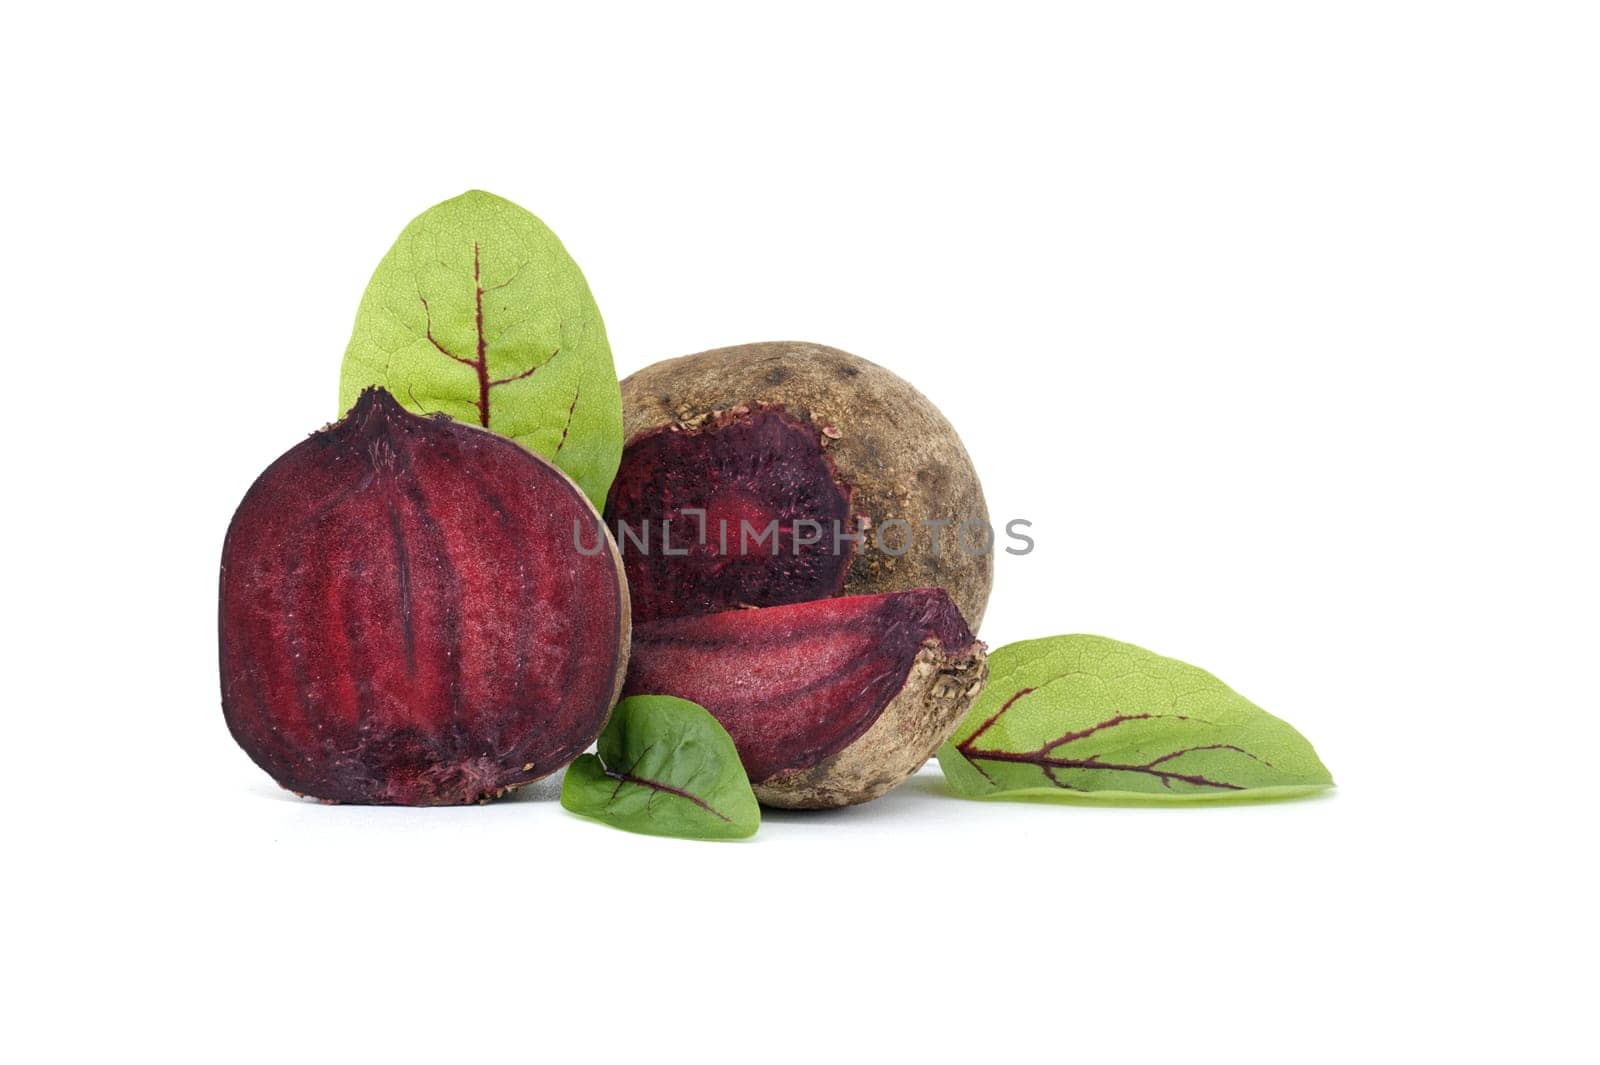 Collection of whole beetroot arranged next to slices of beetroot vegetables with their green leaves still attached isolated on a white background